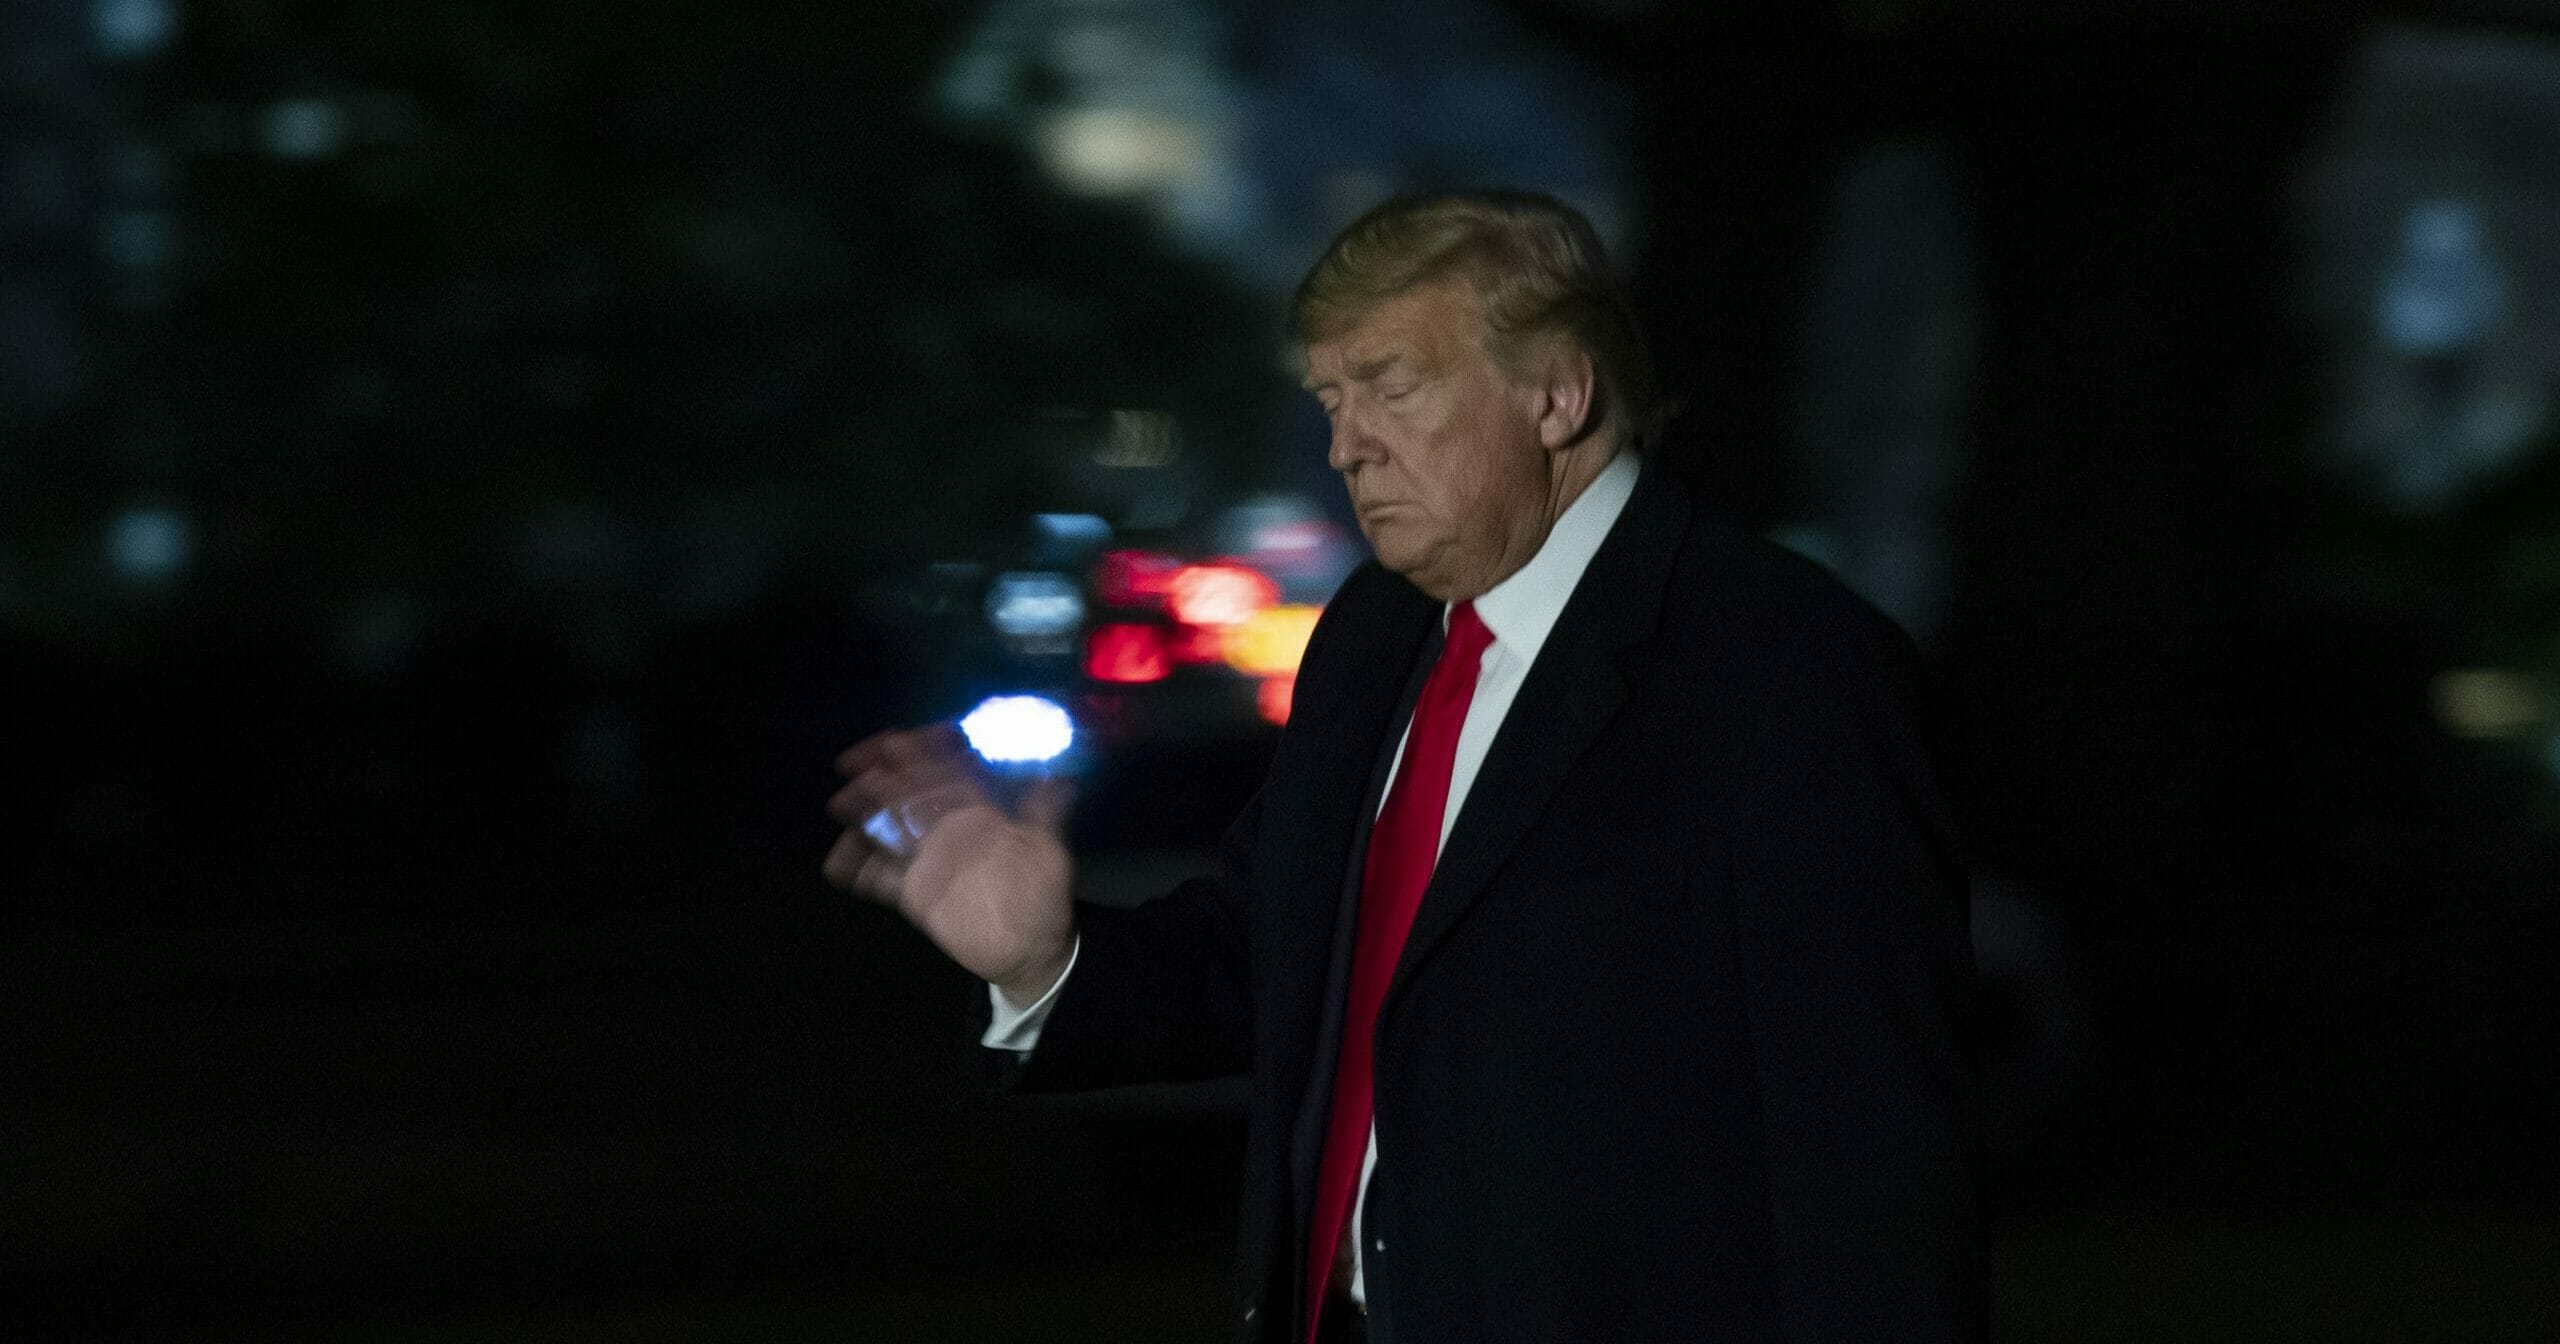 President Donald Trump waves as he walks on the South Lawn of the White House, with the U.S. Capitol in the background, after returning on Marine One on Jan. 23, 2020, in Washington, D.C.